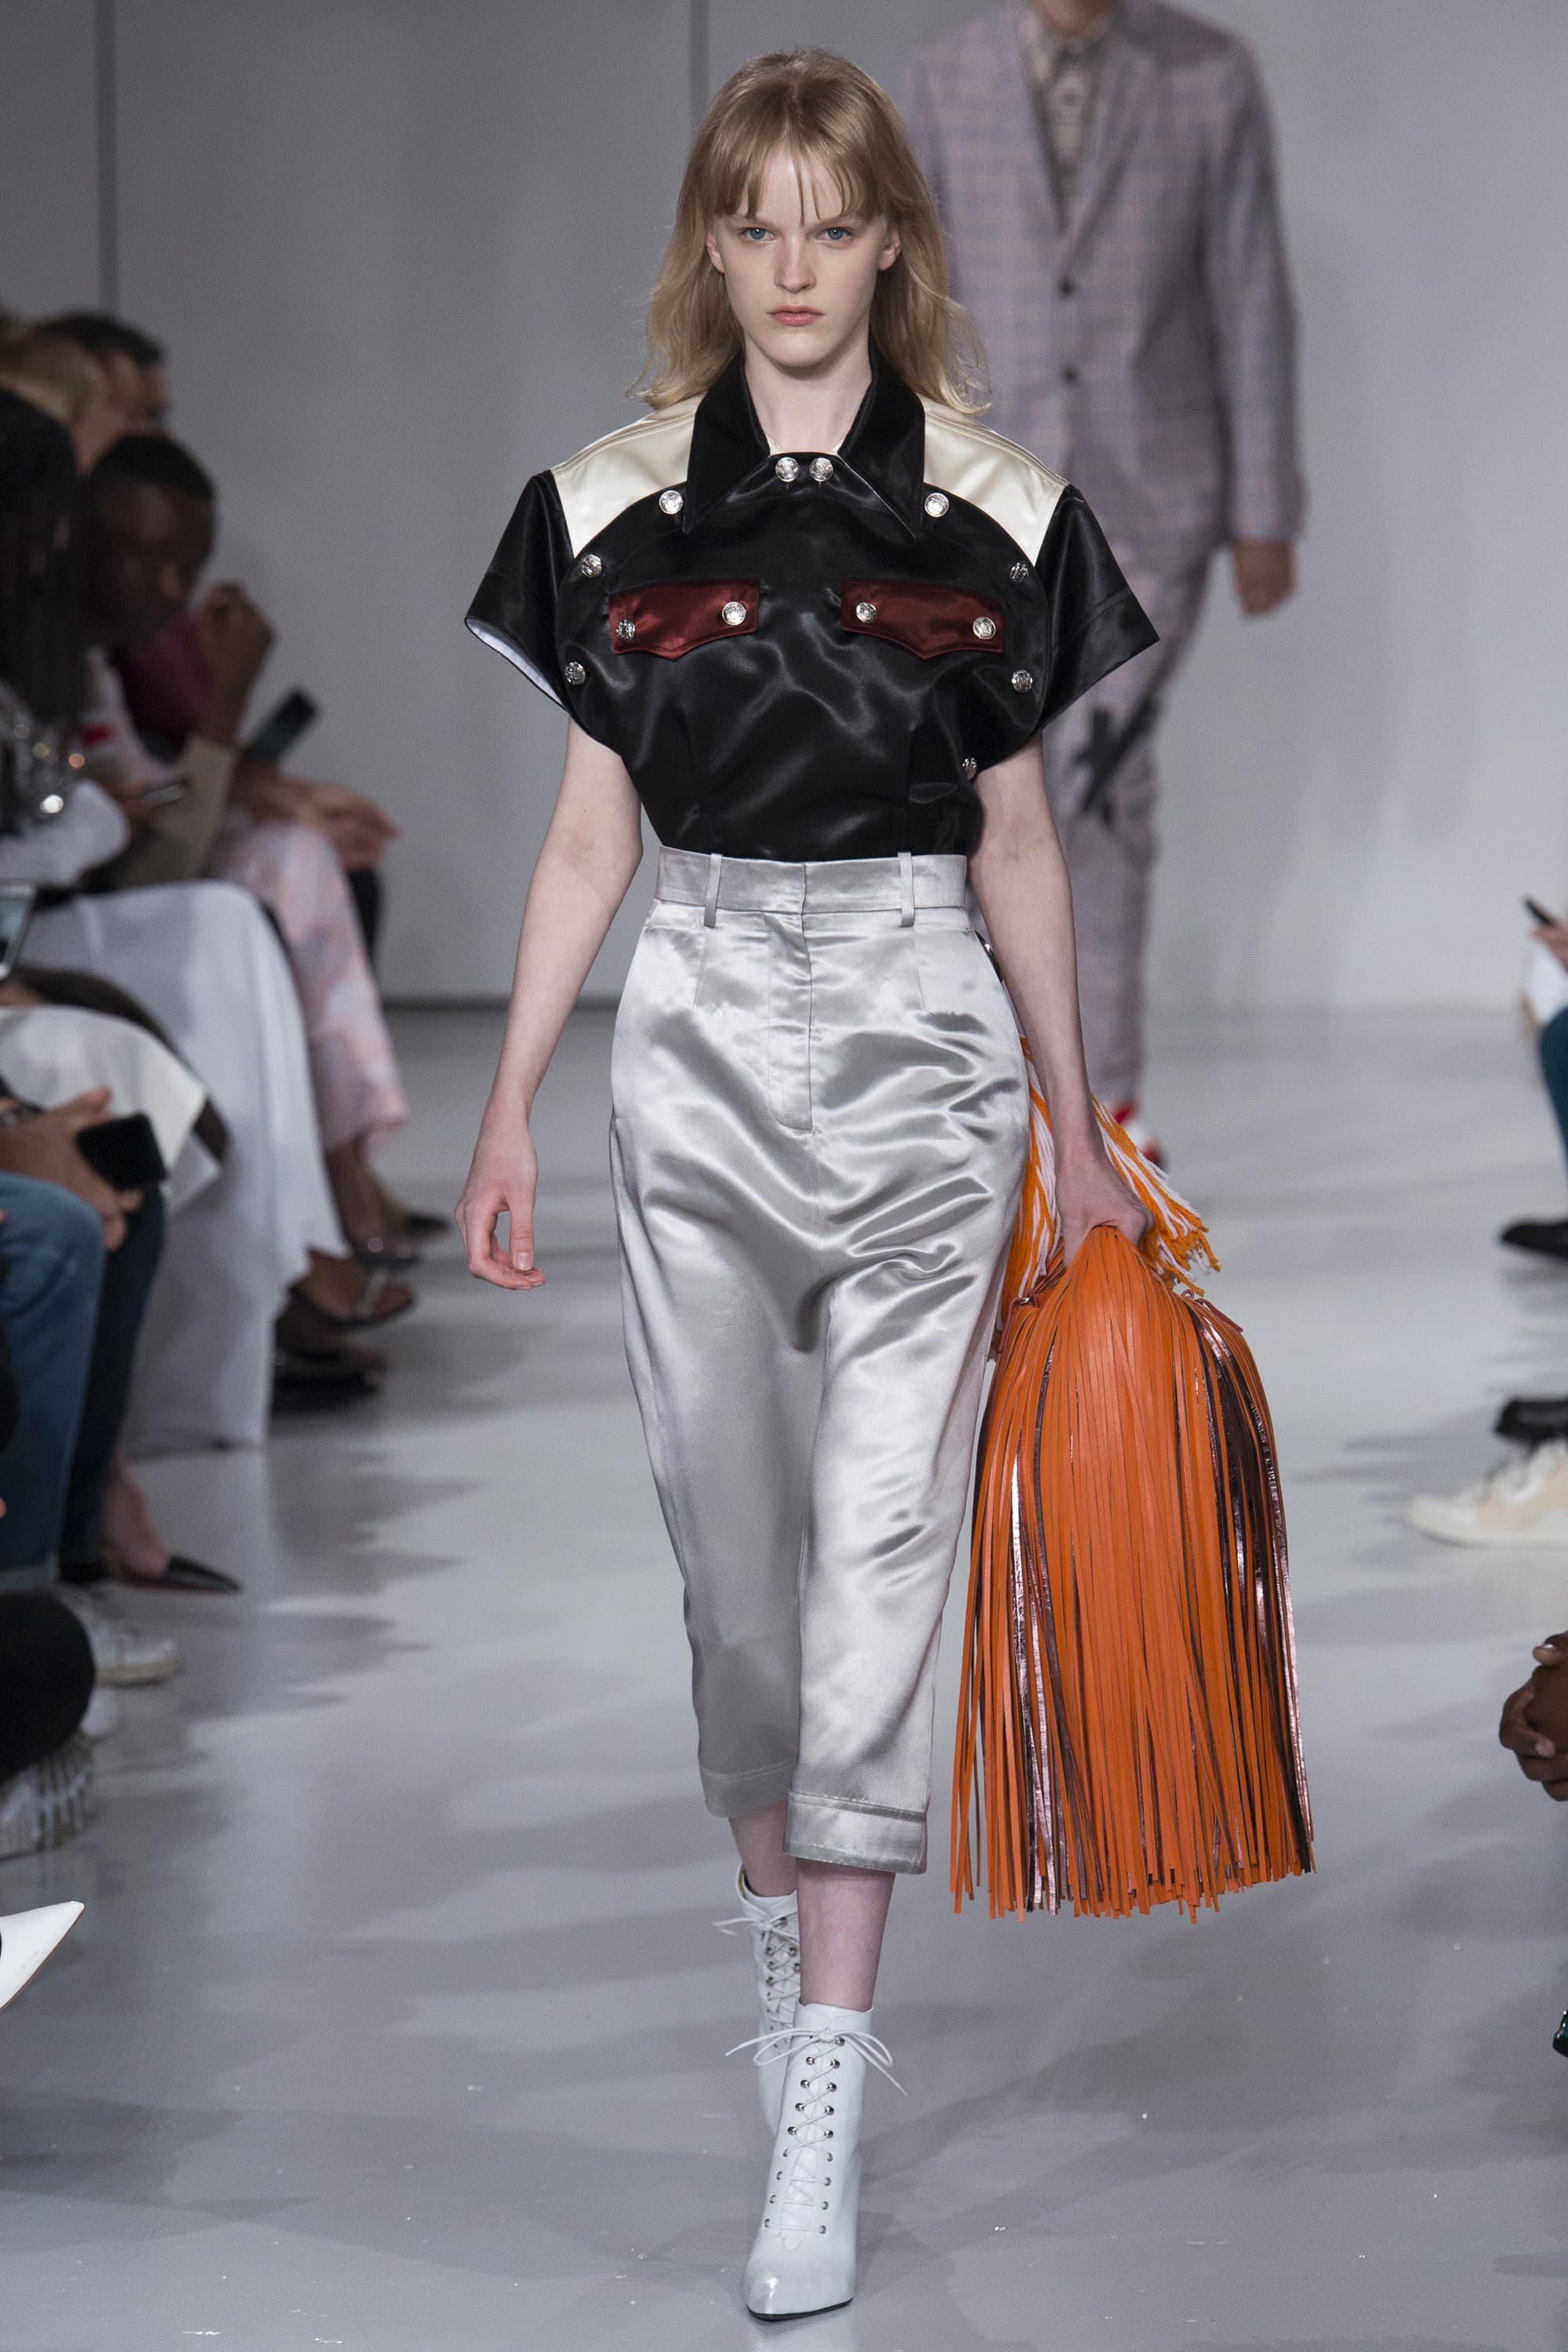 Calvin Klein, Raf Simons, Western, Cowboy Look, Western Trend, SS18, Western Outfit, Fringes, Trendy Tuesday, Style, Fashion, Fashion Inspiration, Spring Fashion, SS18, Spring Summer 2018, Shop the Look